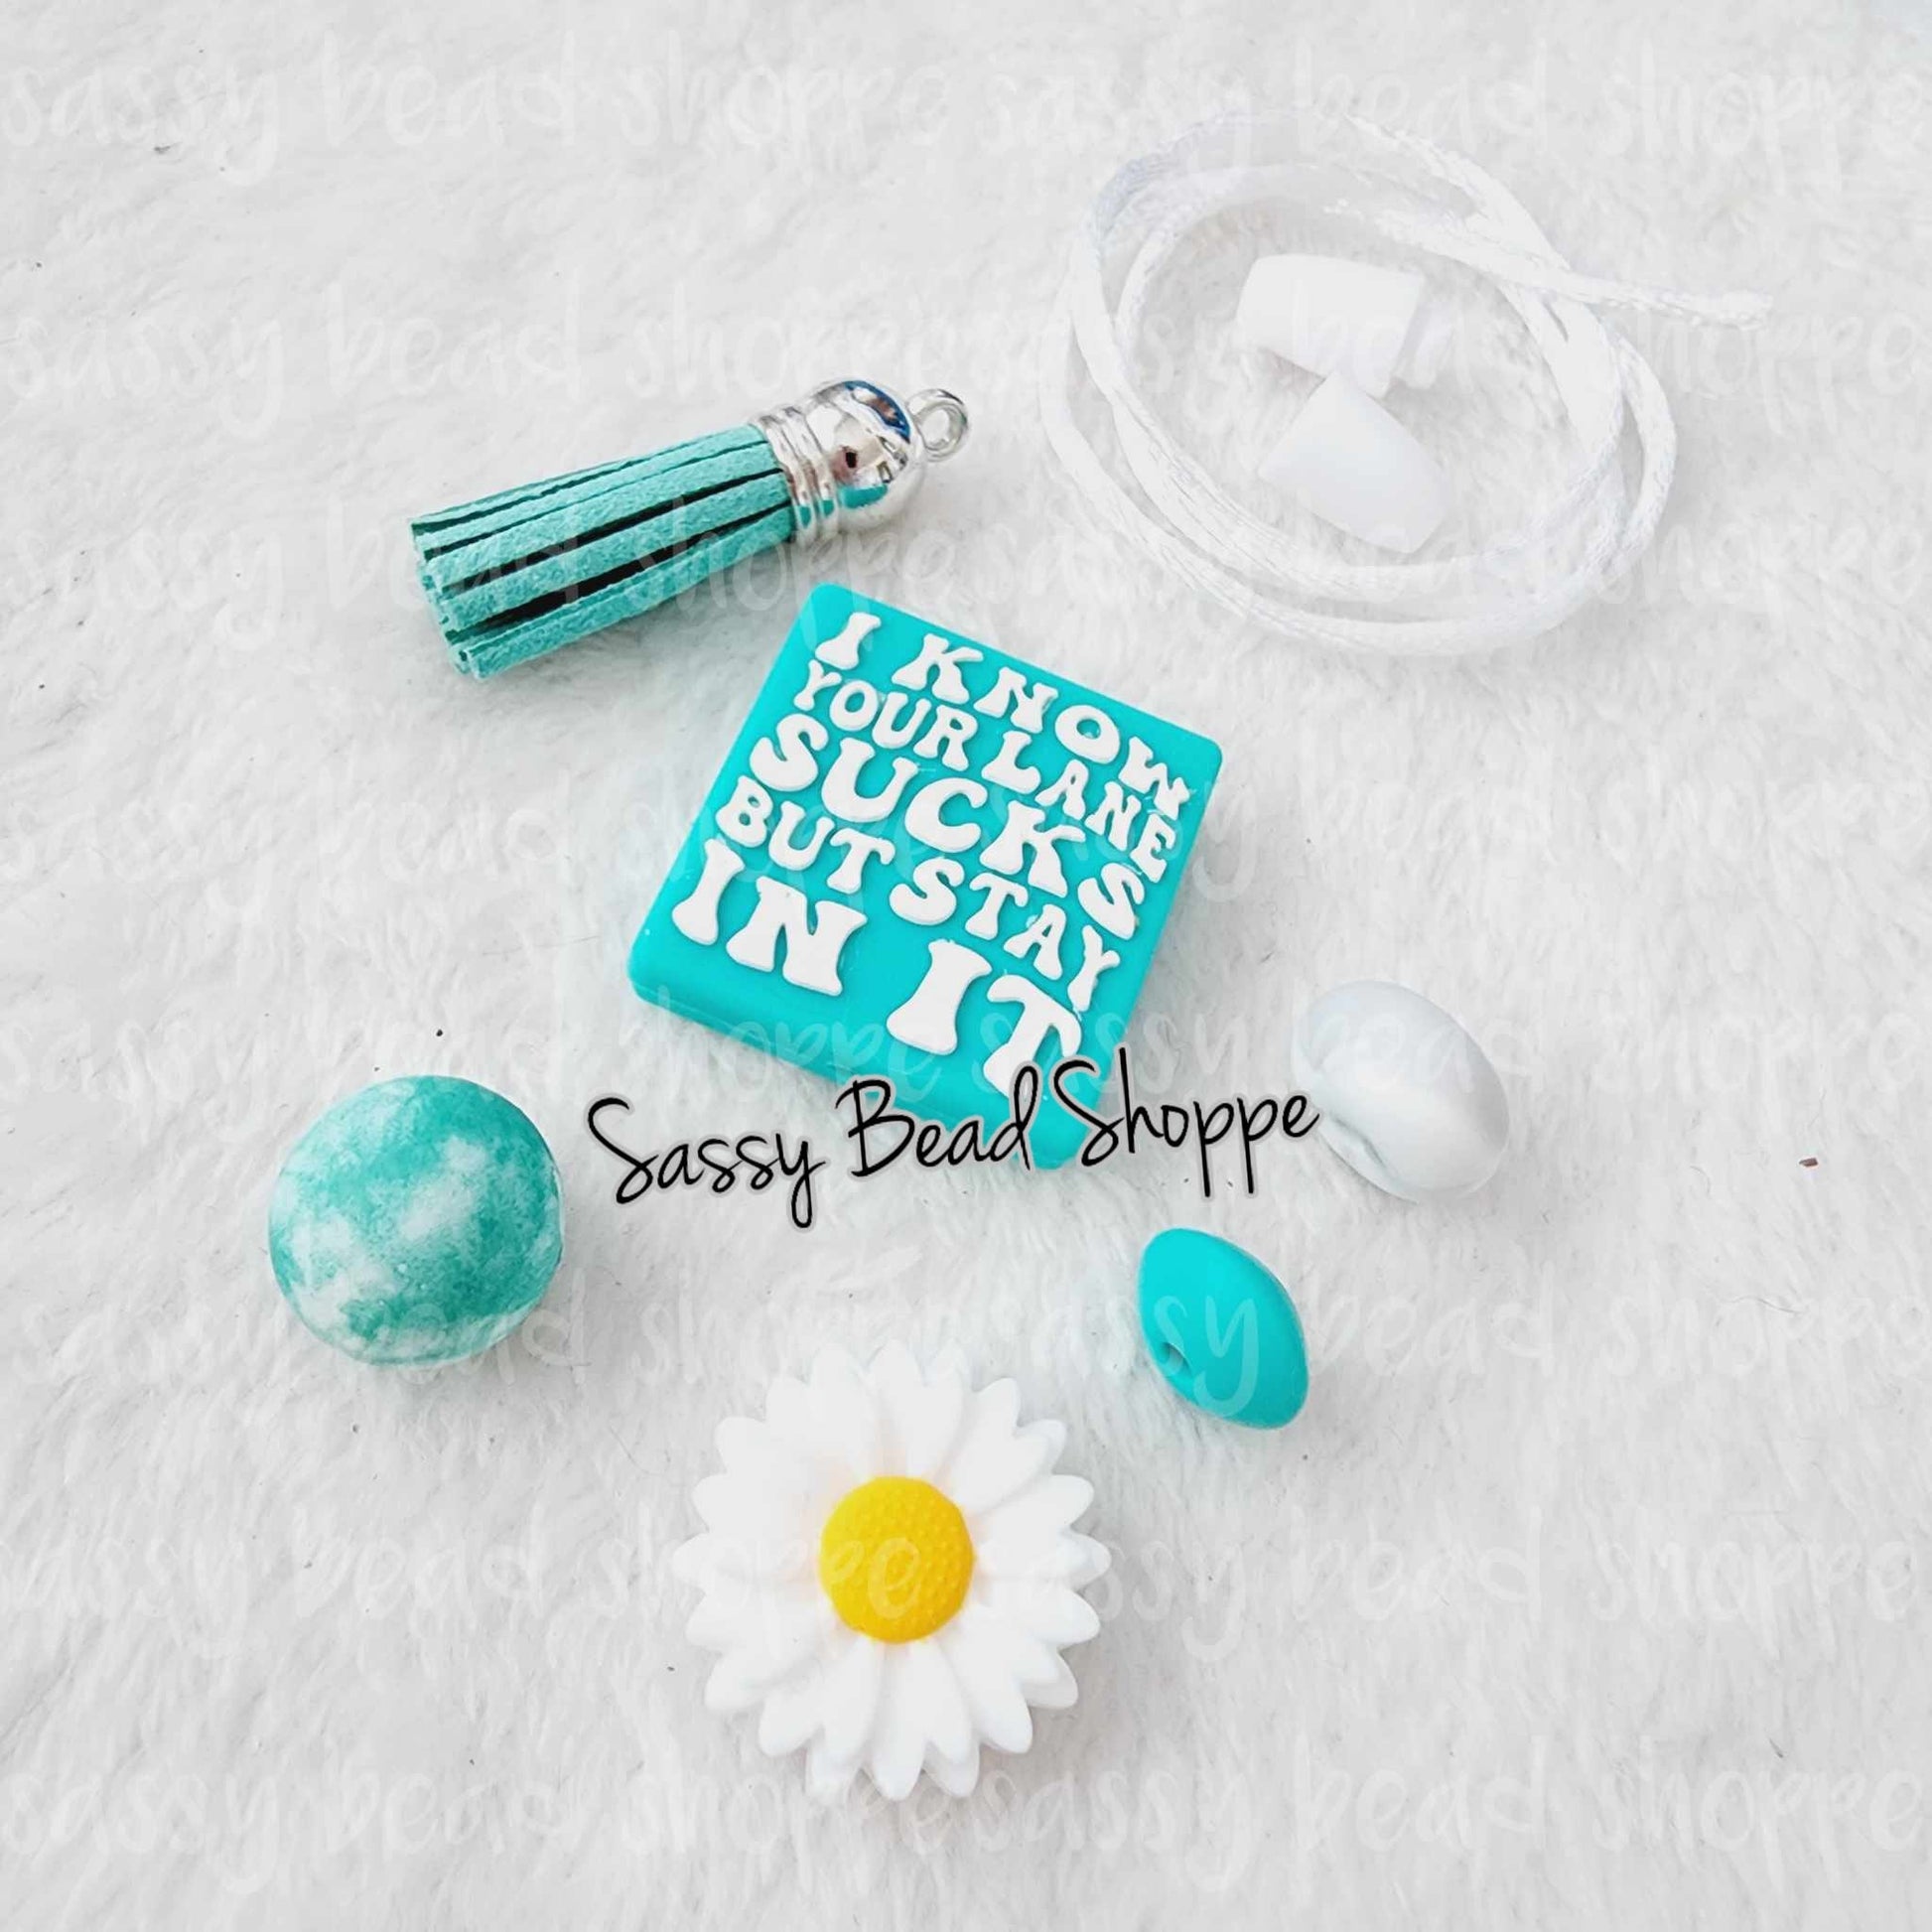 Sassy Bead Shoppe Daisy Lane Car Charm What you will receive in your kit